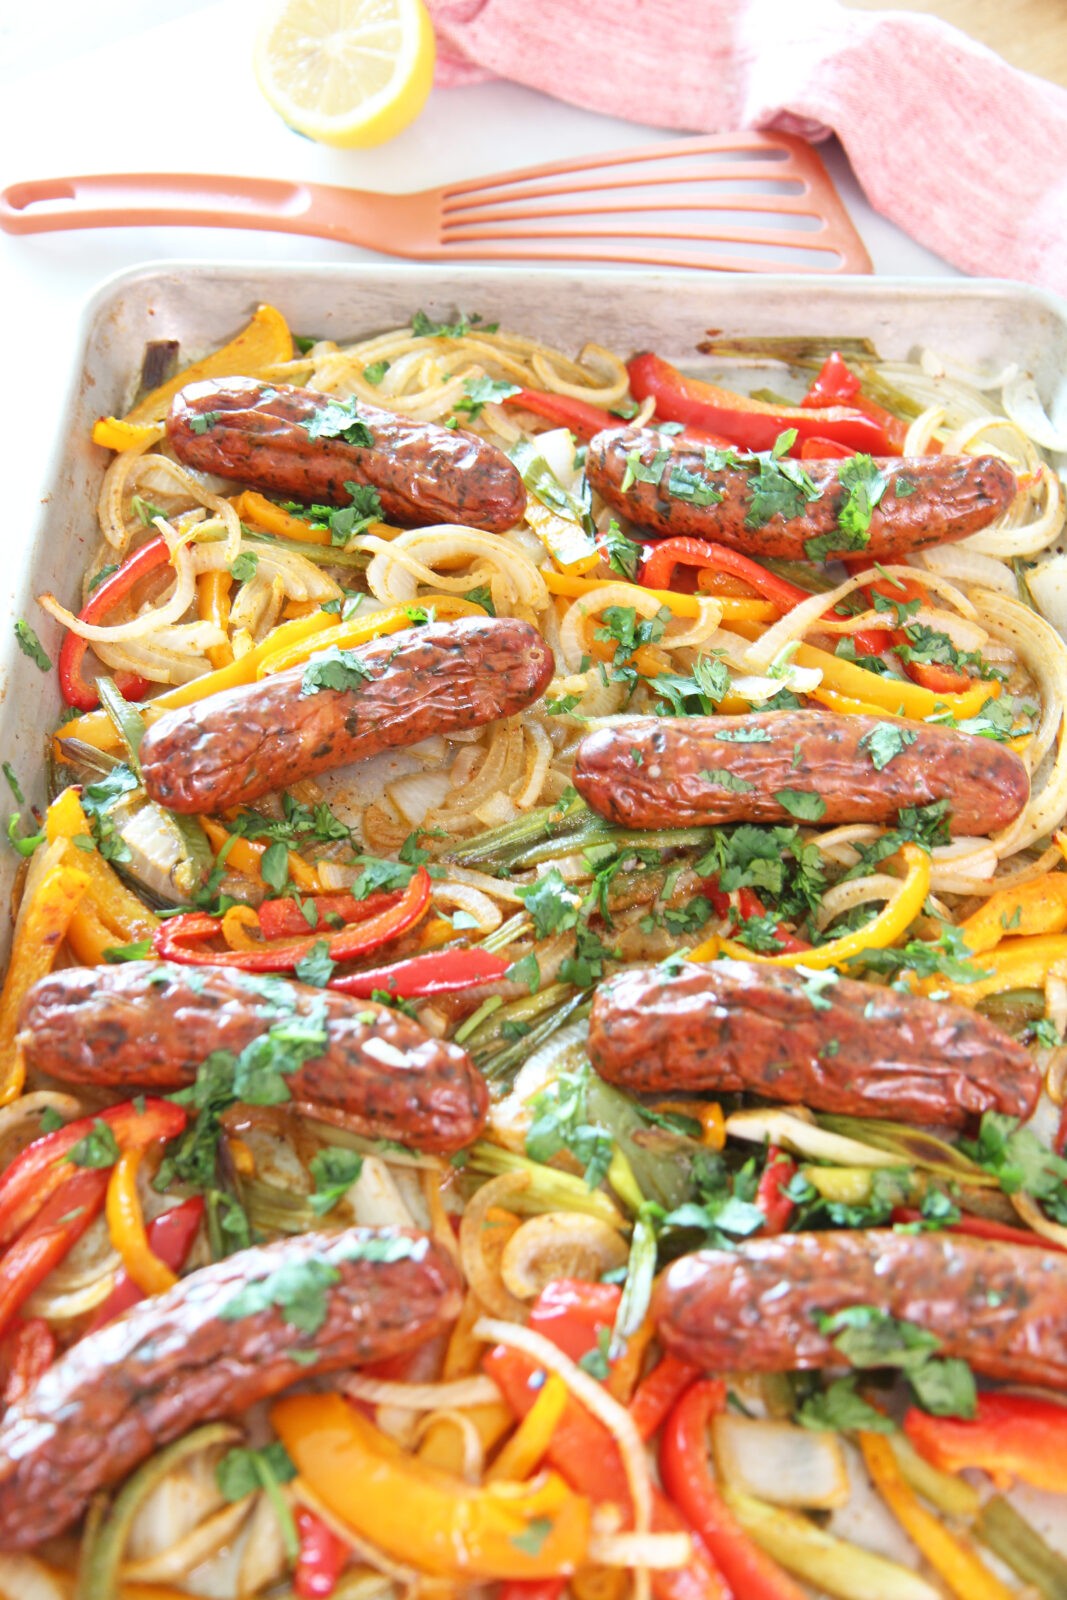 Sheet Pan Mexican Chicken Sausage and Peppers Recipe. This is a super quick sheet pan dinner. Grab smoked chicken sausage, peppers, jalapenos, adobo sauce, and fun herbs. Happy Cooking! www.ChopHappy.com #sheetpanrecipe #chickensausage